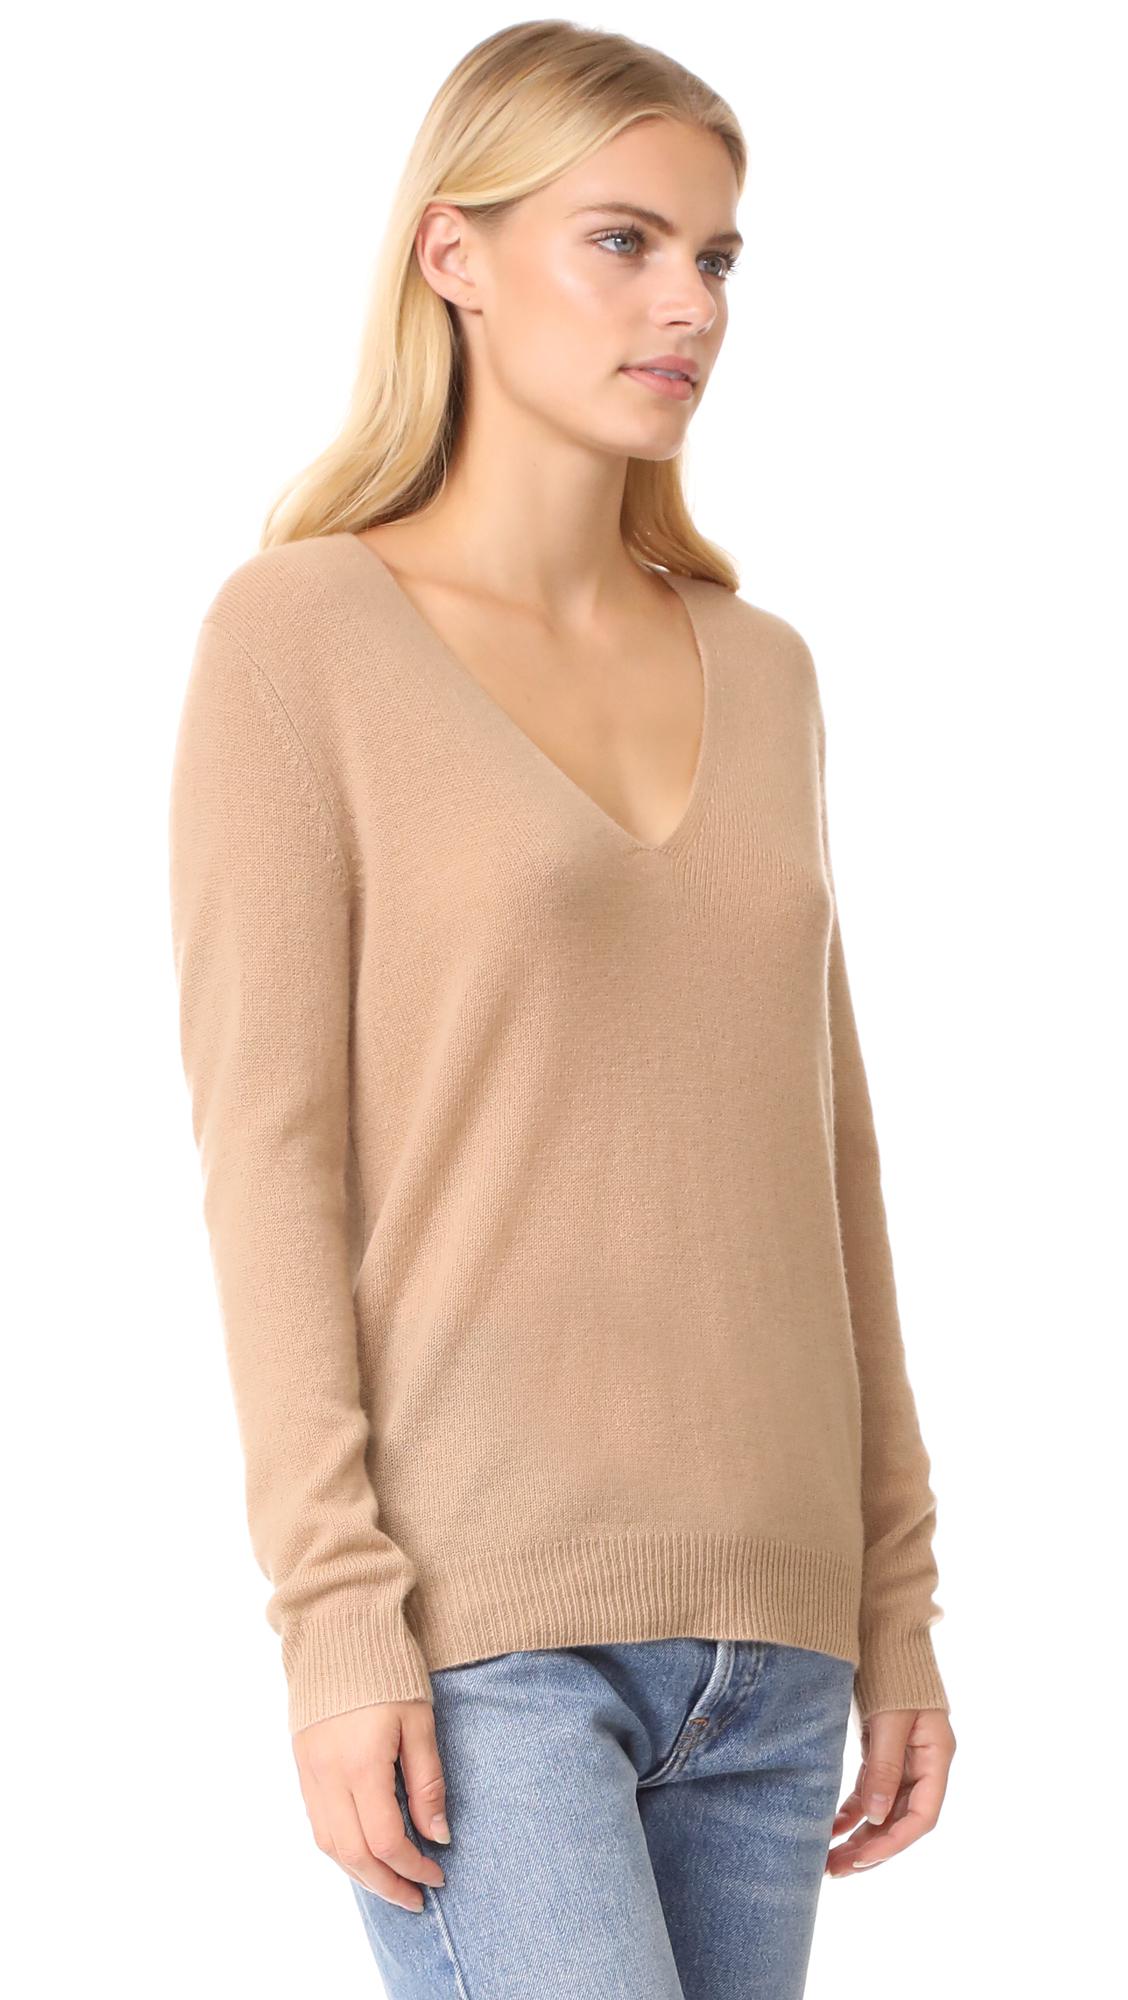 Lyst - Theory Adrianna Cashmere Sweater in Natural